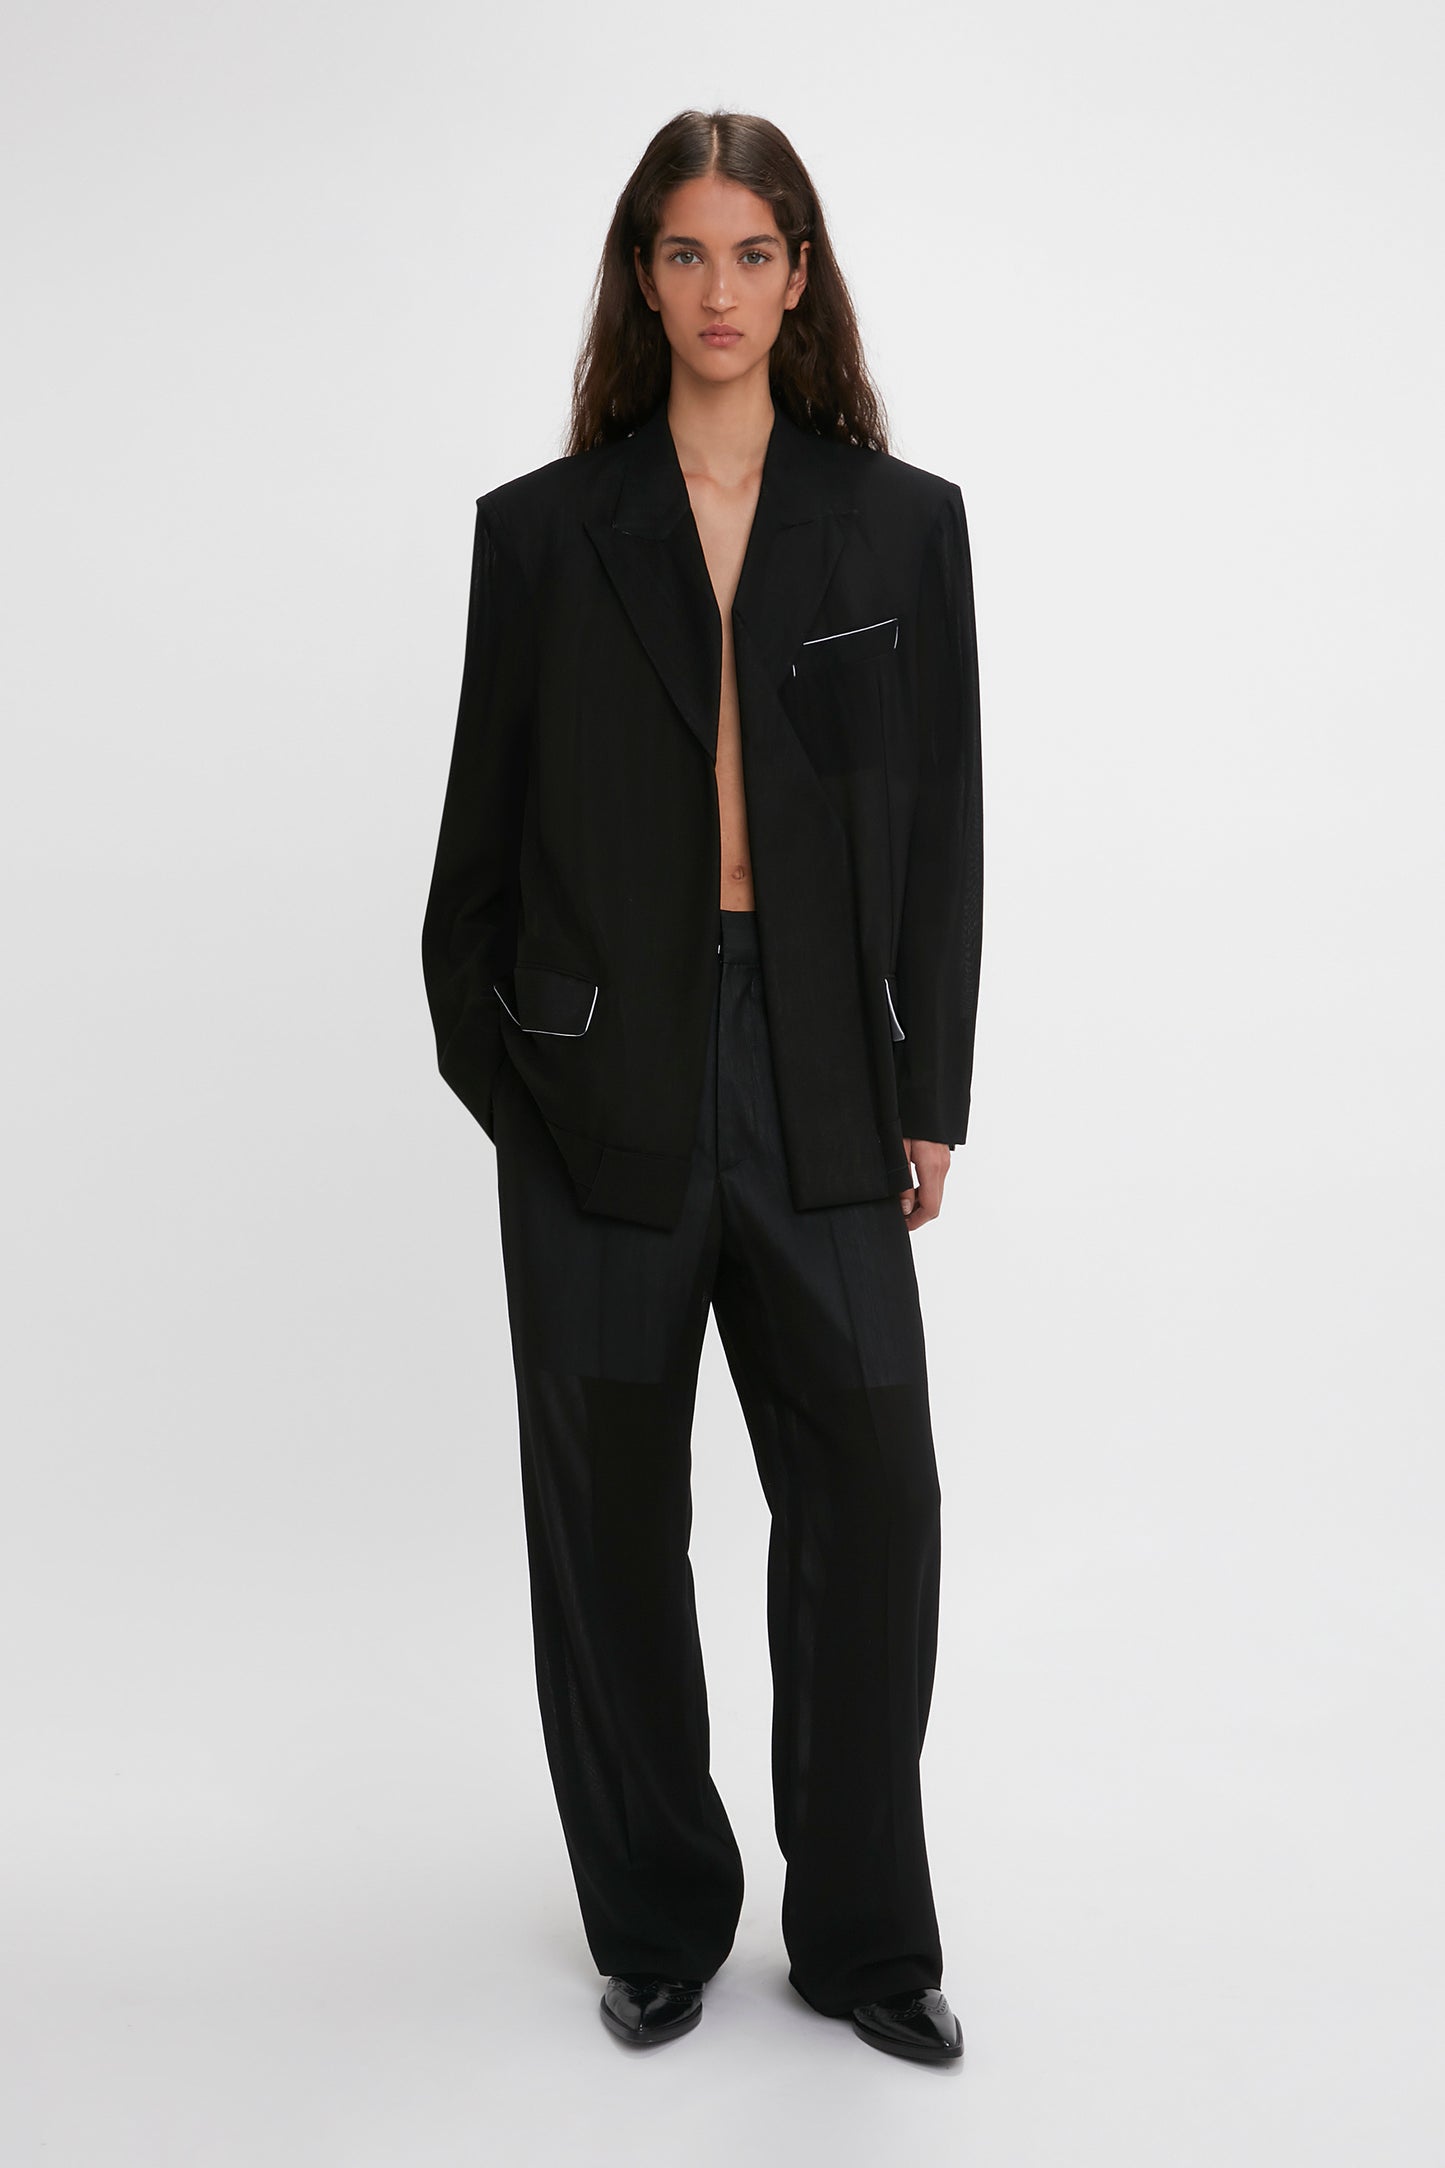 A woman models a Victoria Beckham black wool Fold Detail Tailored Jacket with waistband detail straight leg trousers, standing against a plain white background.